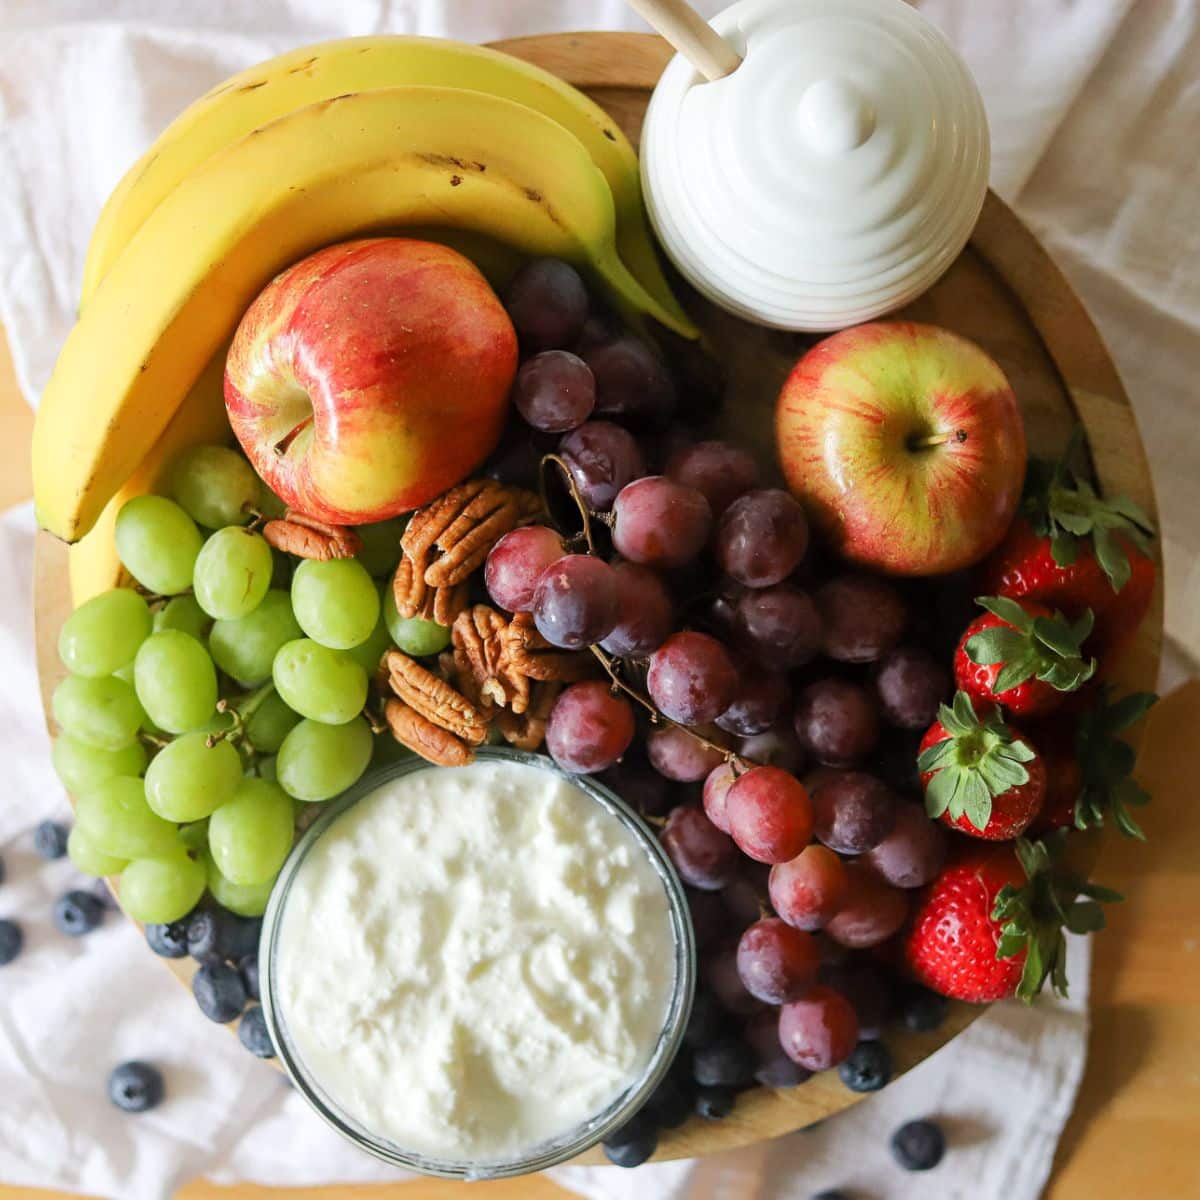 ingredients for a delicious breakfast fruit salad including bananas, apples, grapes, blueberries, strawberries, pecans, yogurt, and honey.